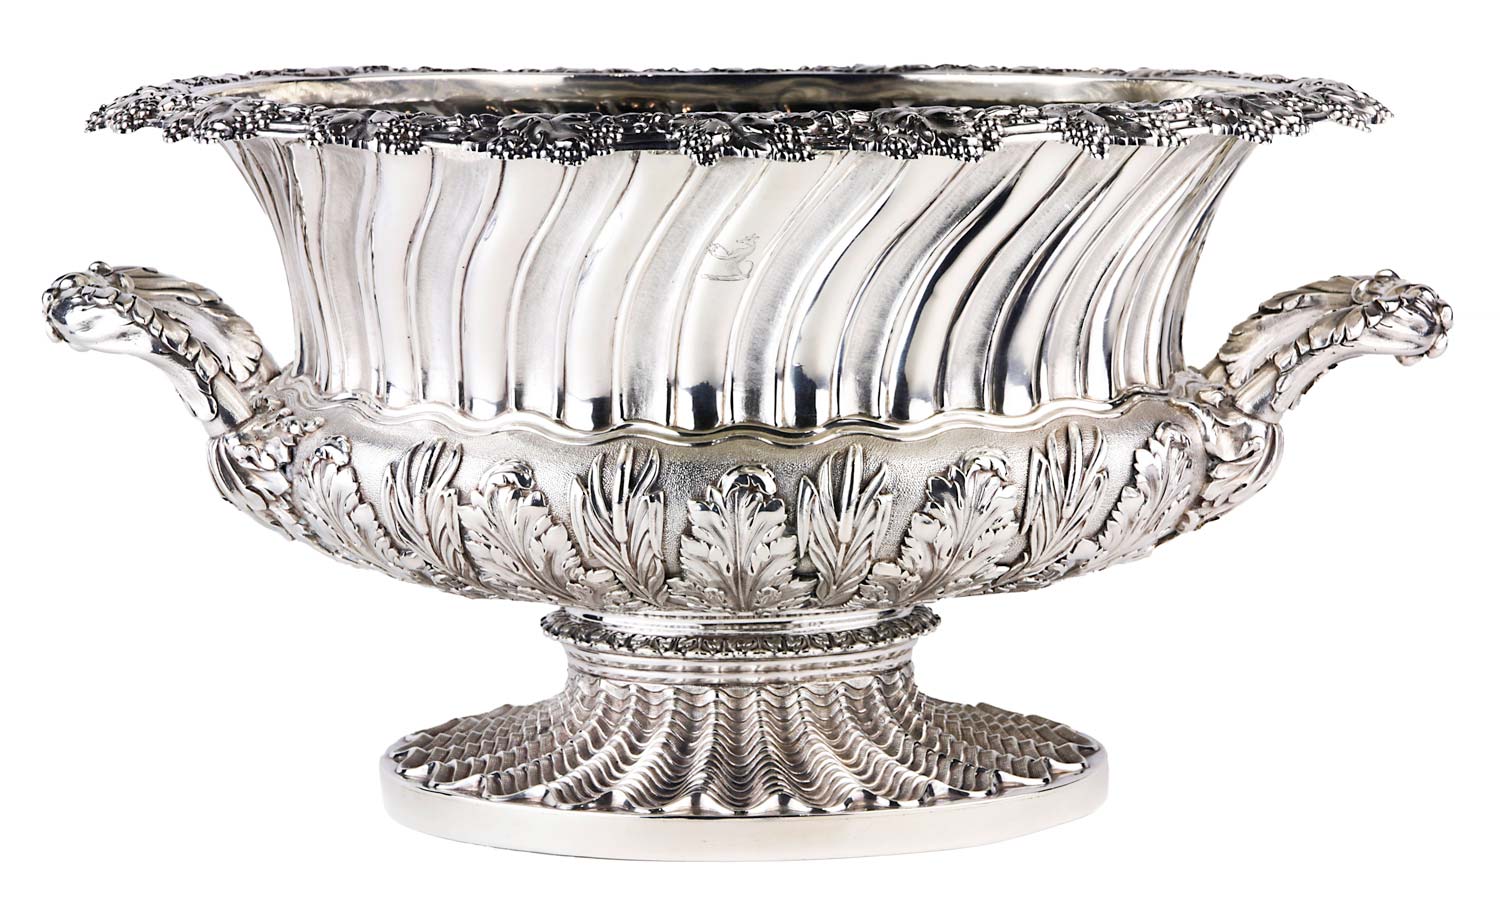 George III sterling punch bowl, estimate $5,000-$7,000. Image courtesy Clars Auction Gallery